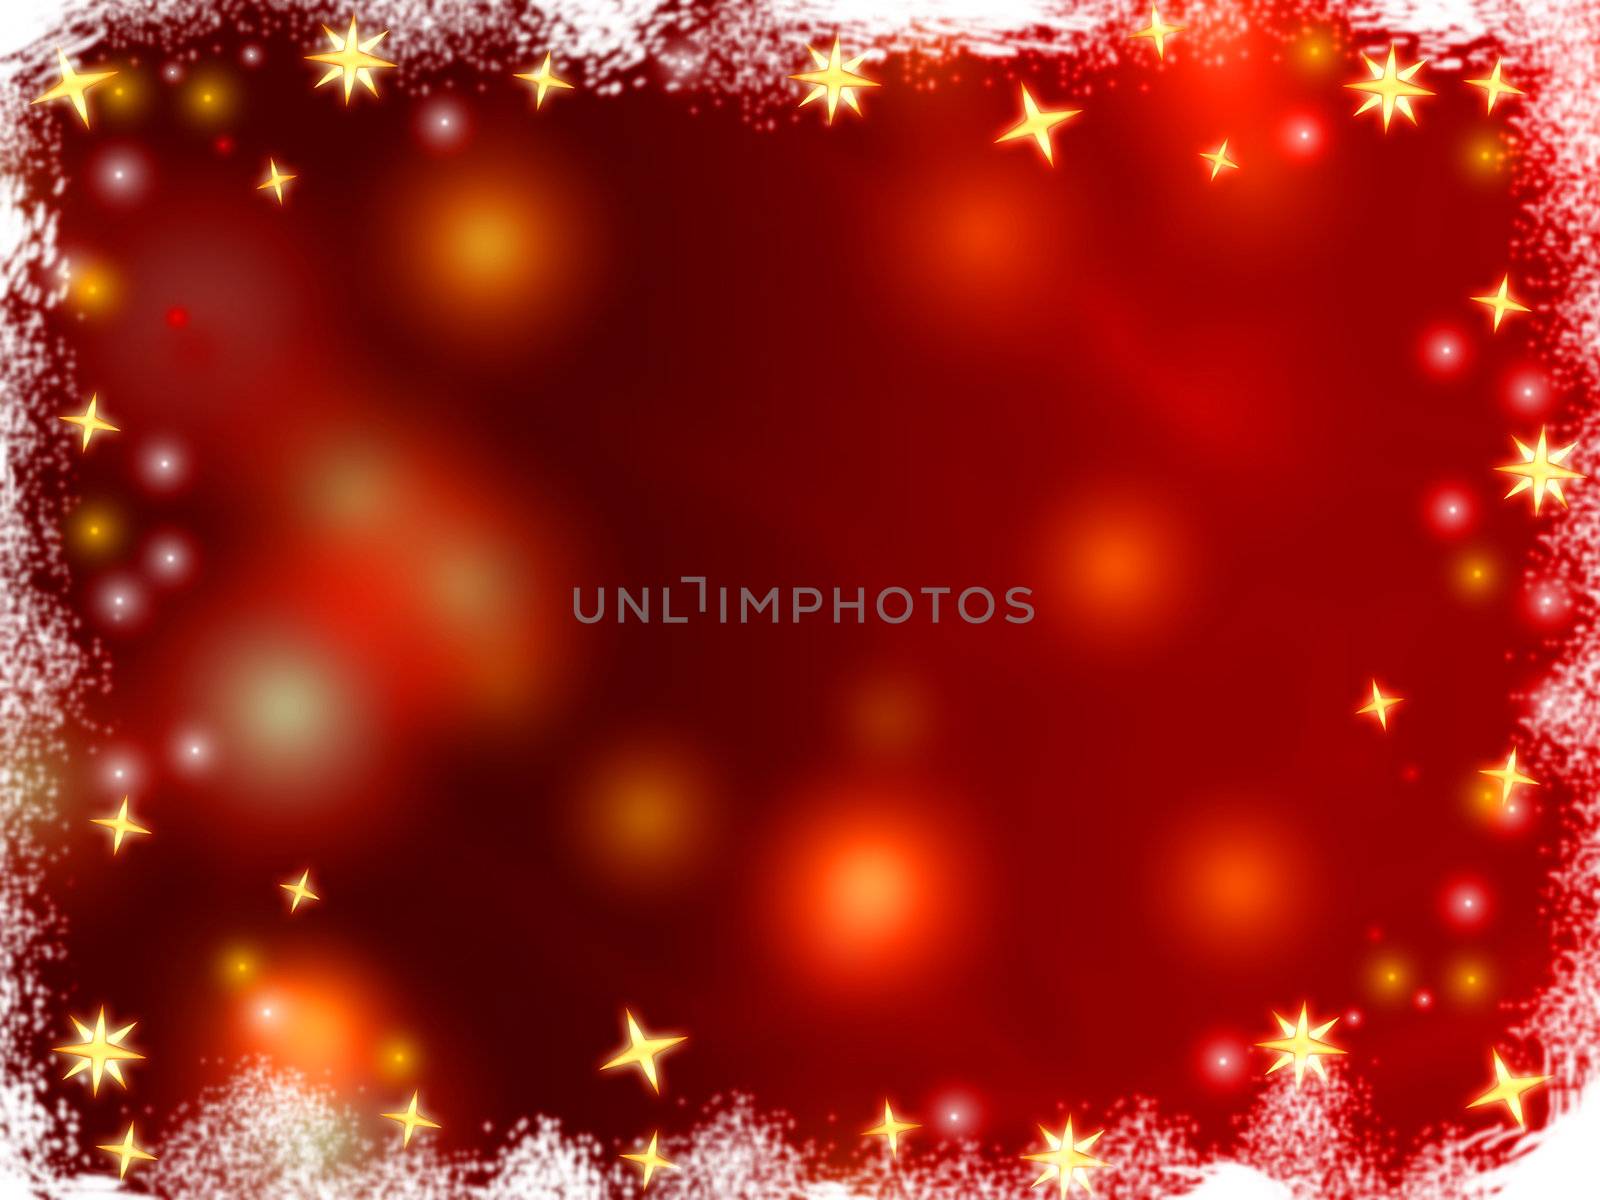 golden 3d stars over red background with lights and gleams
